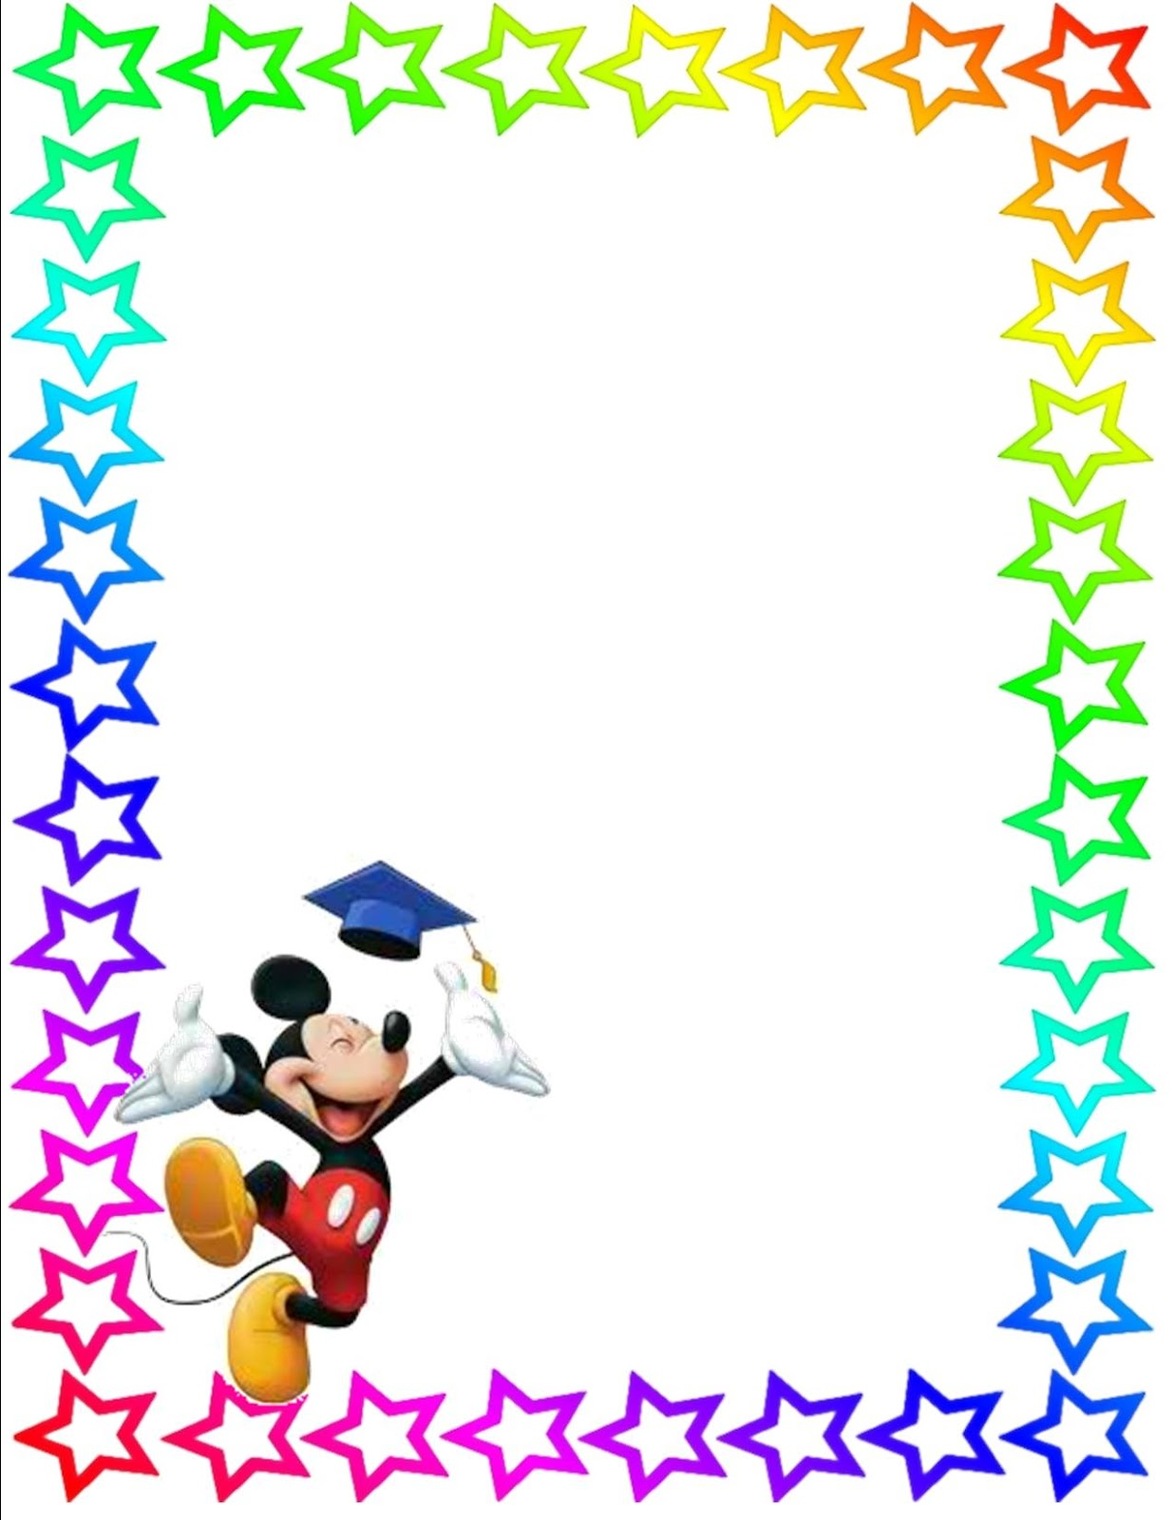 Free Kid Borders Clipart - Free to use Clip Art Resource